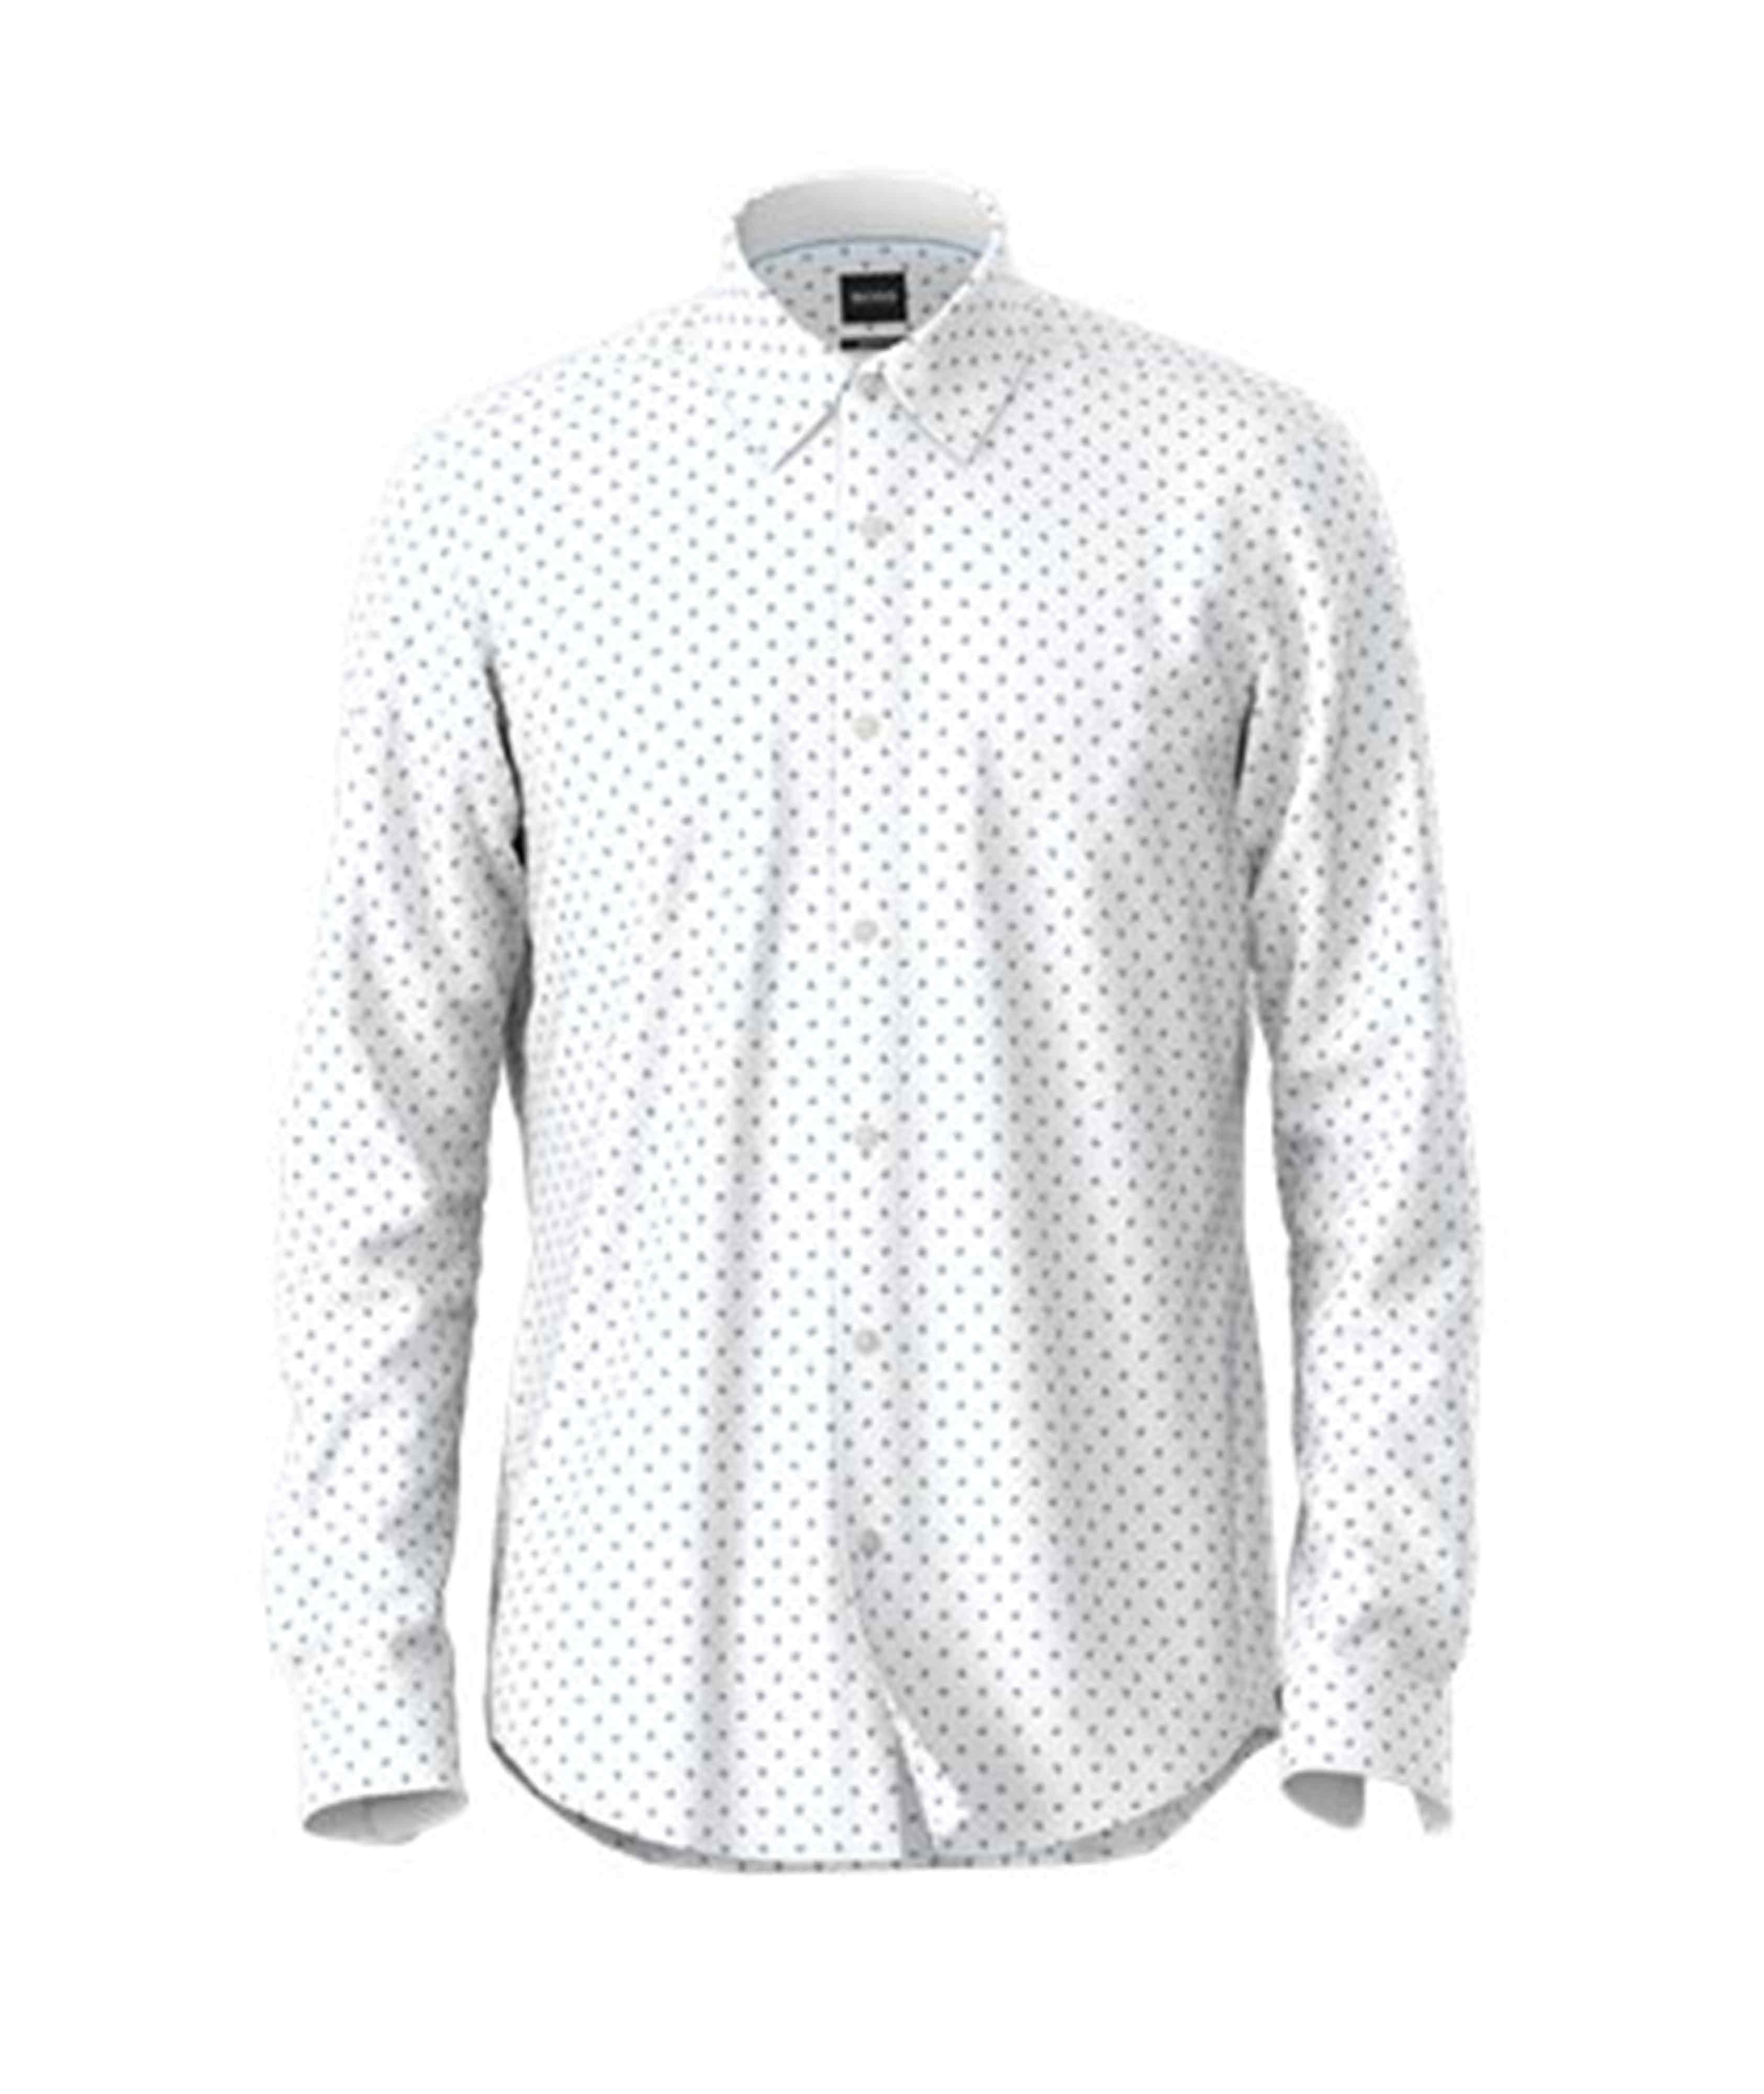 Lukas Contemporary Fit Printed Shirt image 0